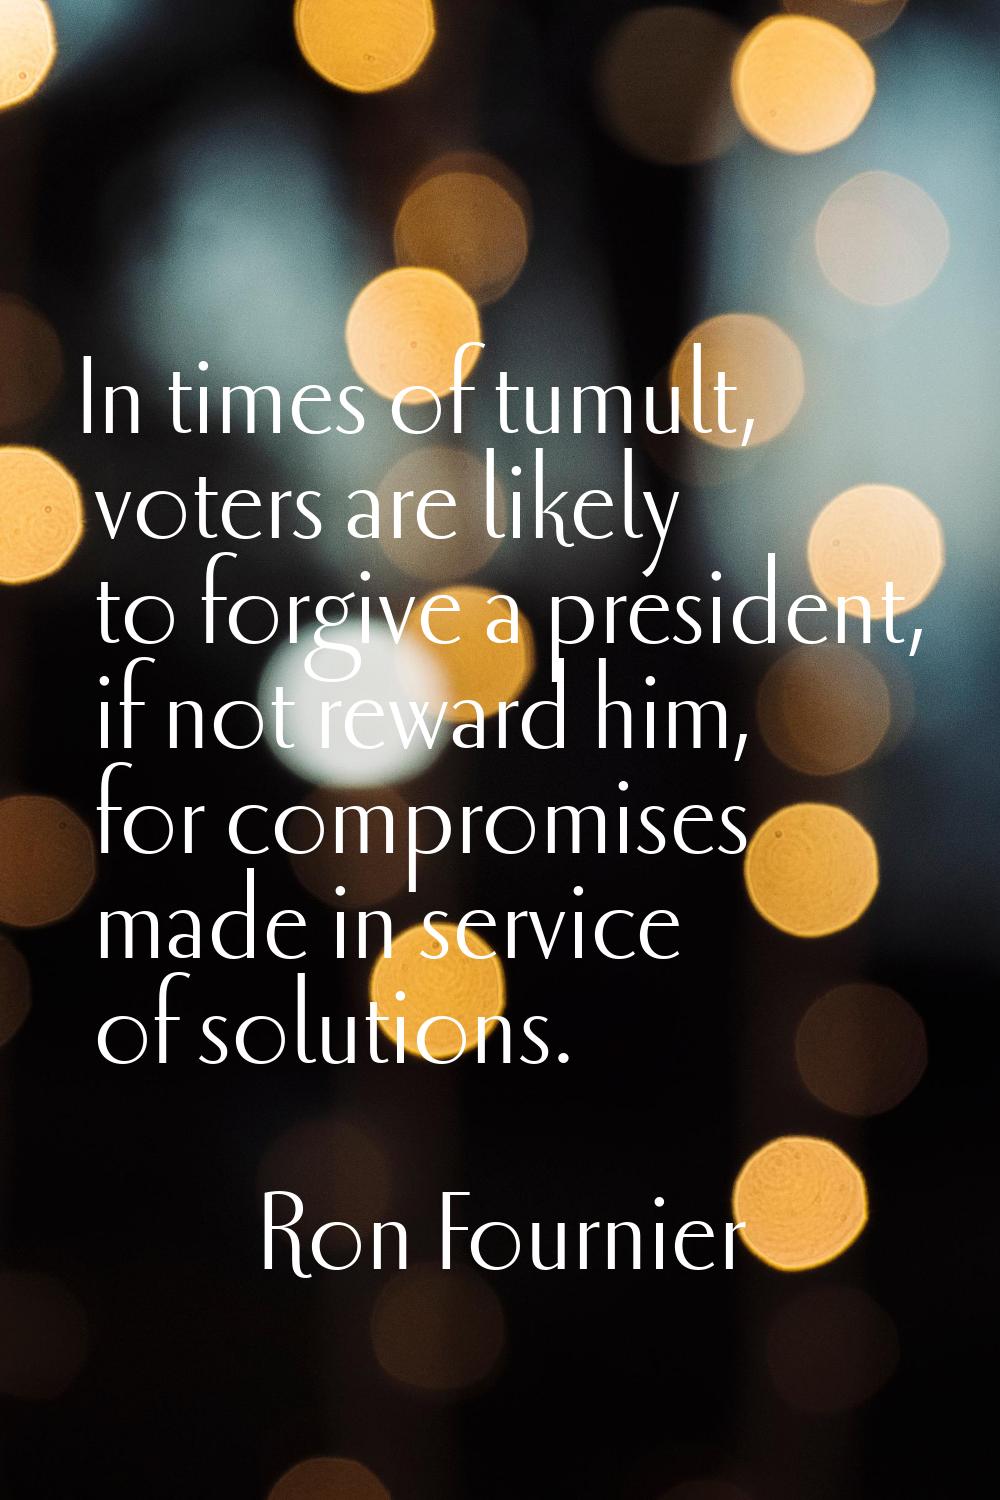 In times of tumult, voters are likely to forgive a president, if not reward him, for compromises ma